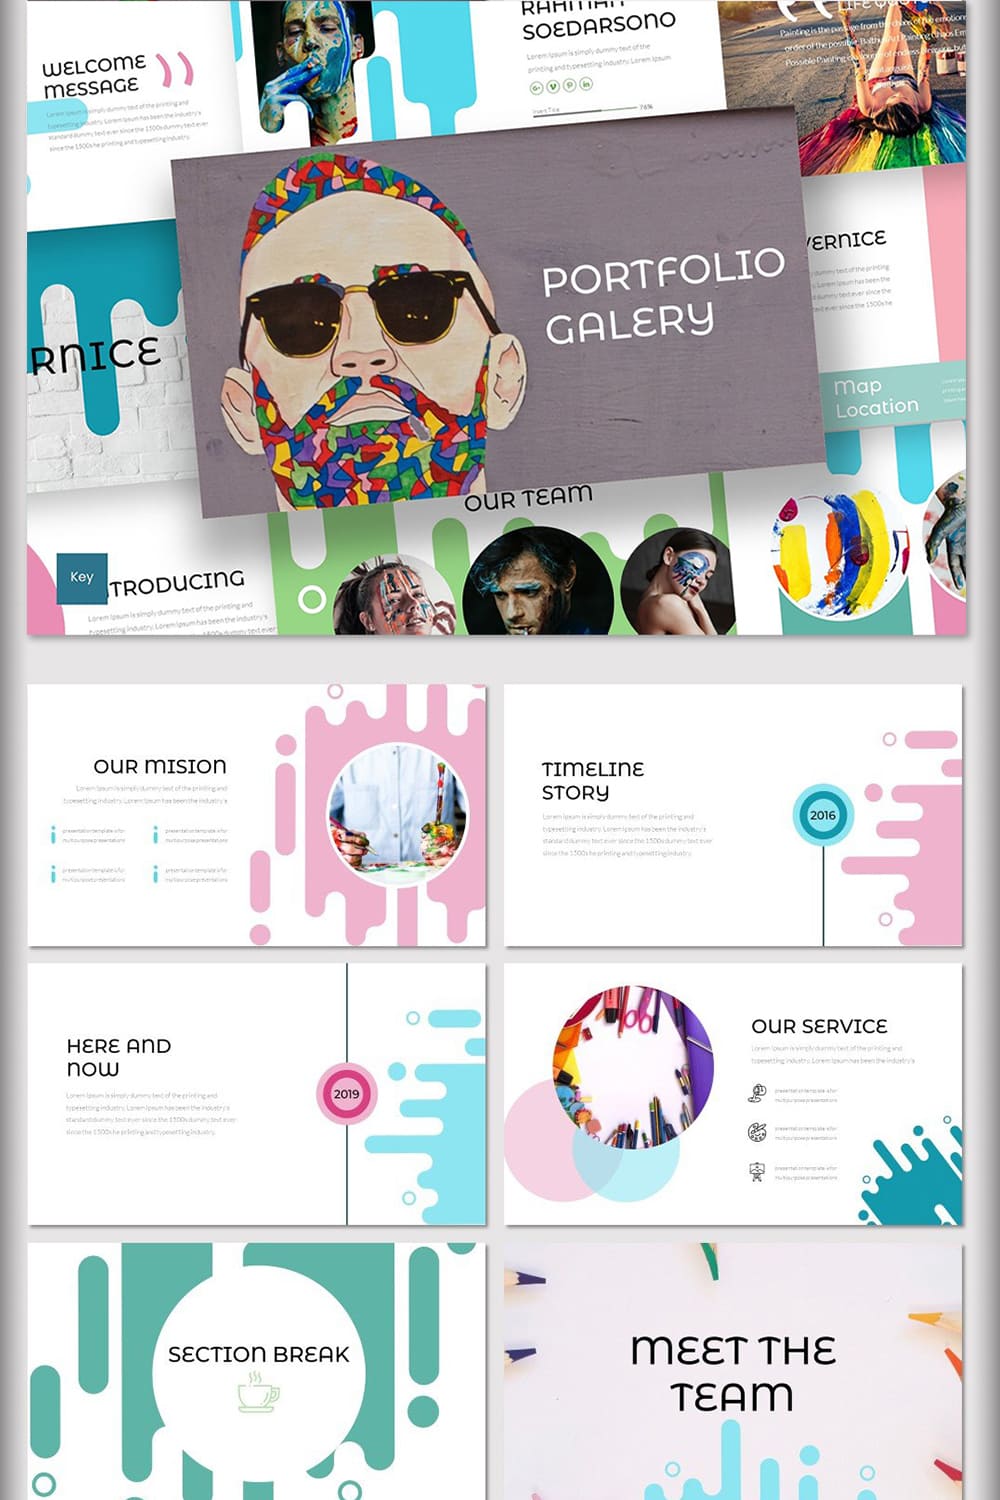 This is a cool hipster template with very vibrant details.